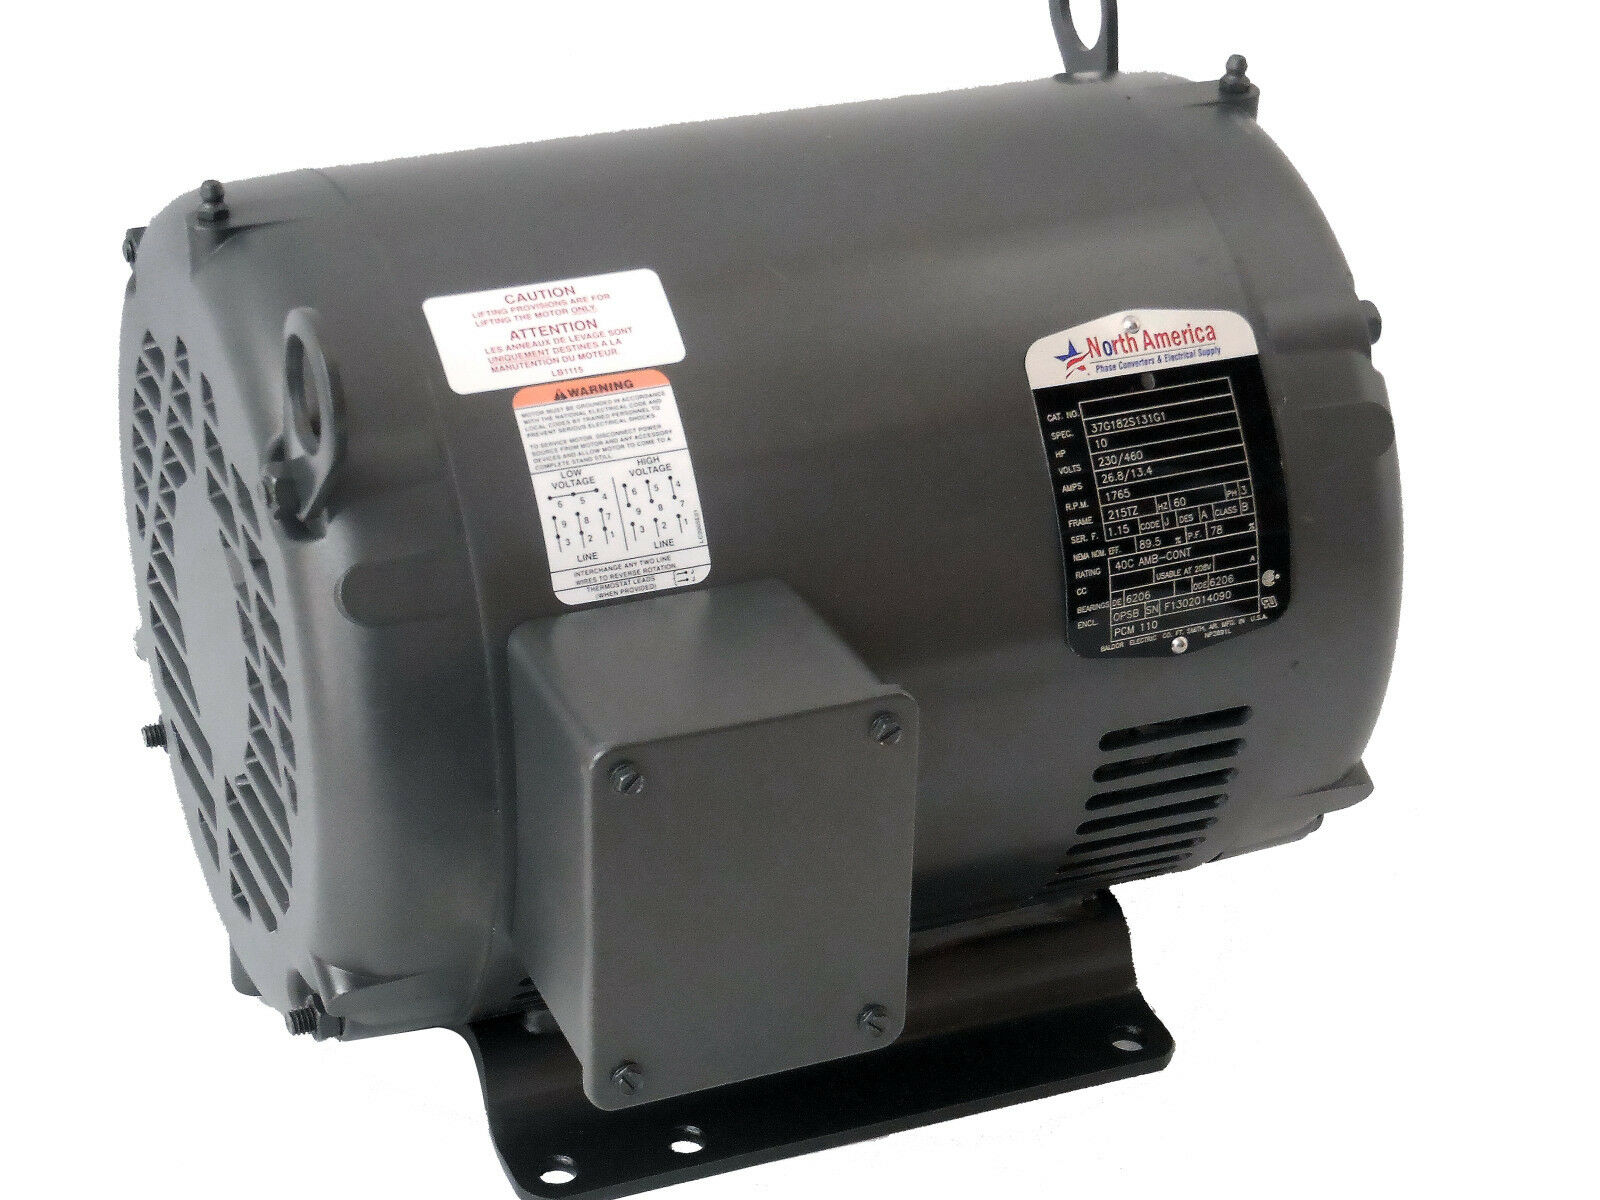 UL-40 Pro-Line 40HP UL Listed Rotary Phase Converter - New - Free Shipping